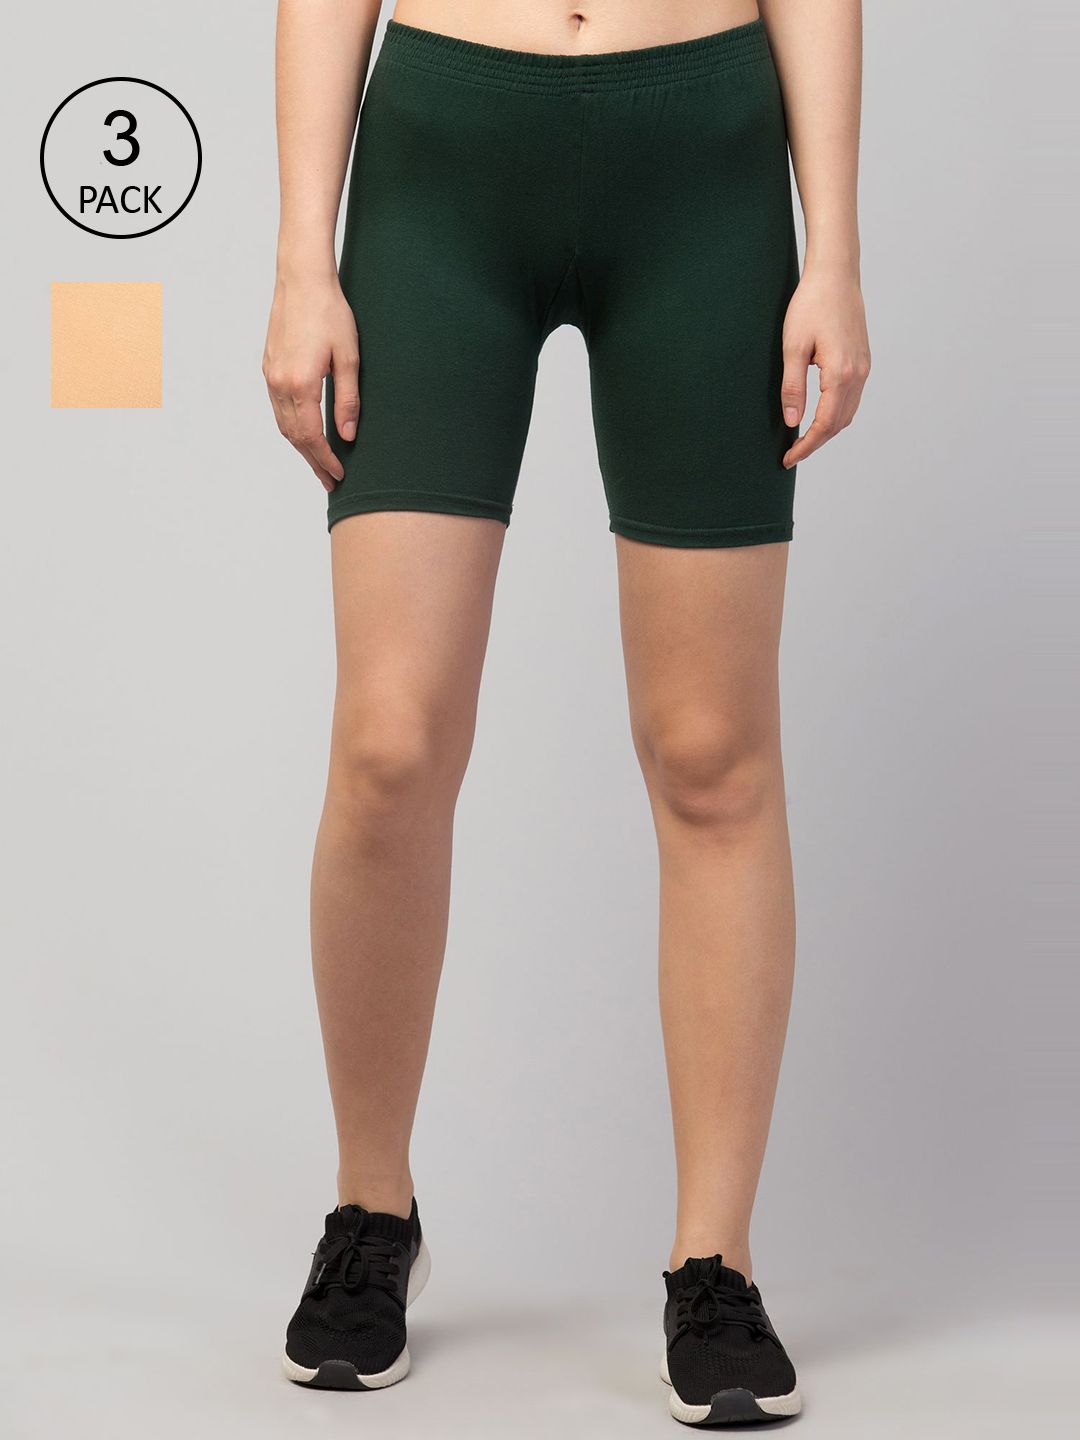 Apraa & Parma Pack Of 3 Women Slim Fit Cycling Sports Shorts Price in India